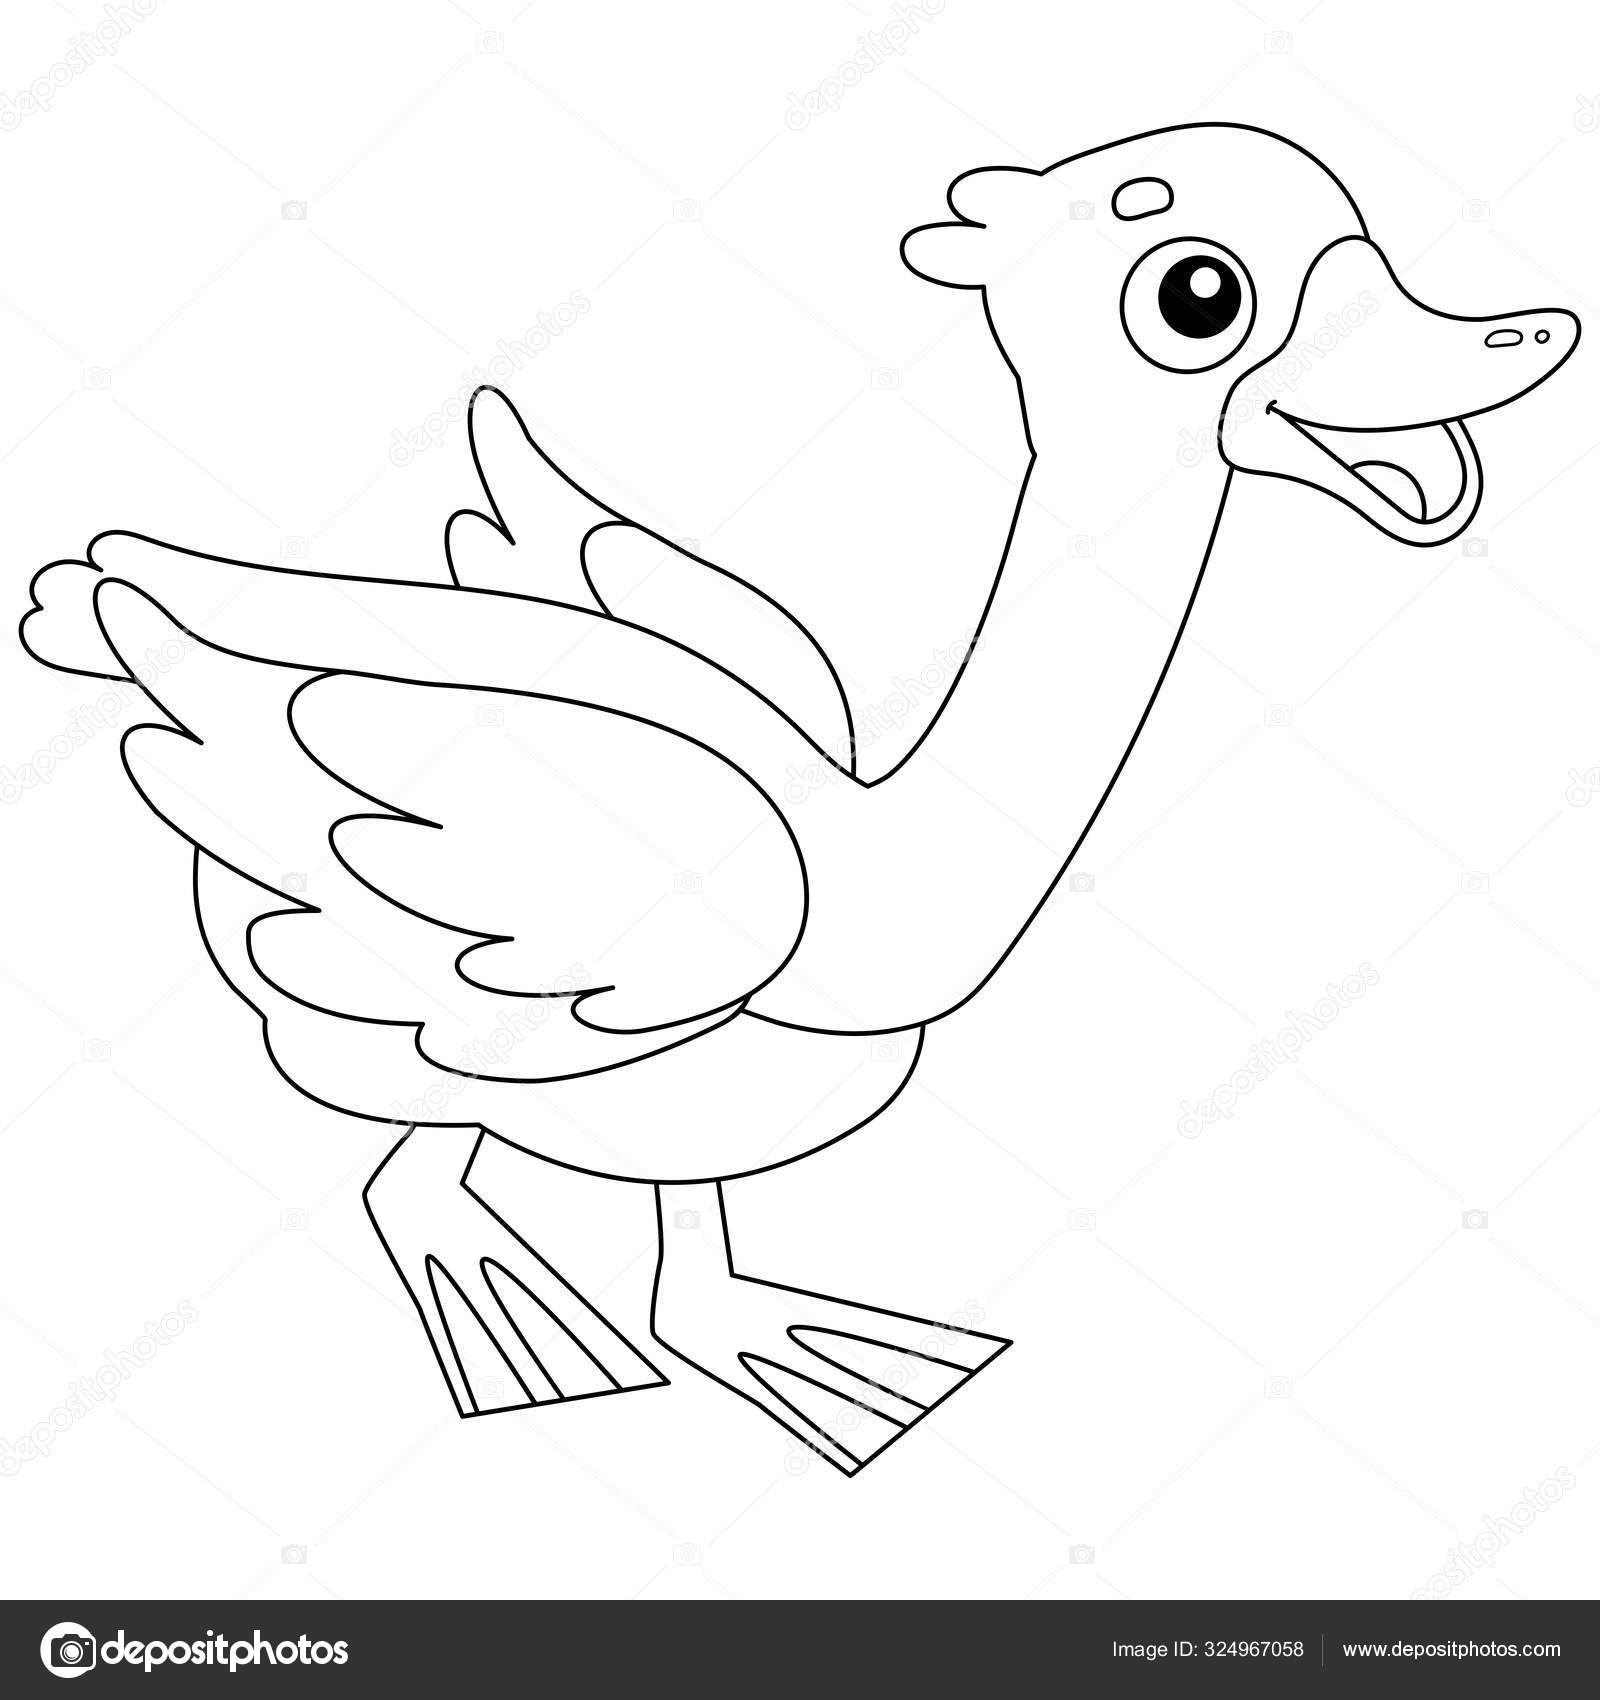 Download Coloring Page Outline Of Cartoon Goose Farm Animals Coloring Book For Kids Stock Vector Image By C Oleon17 324967058